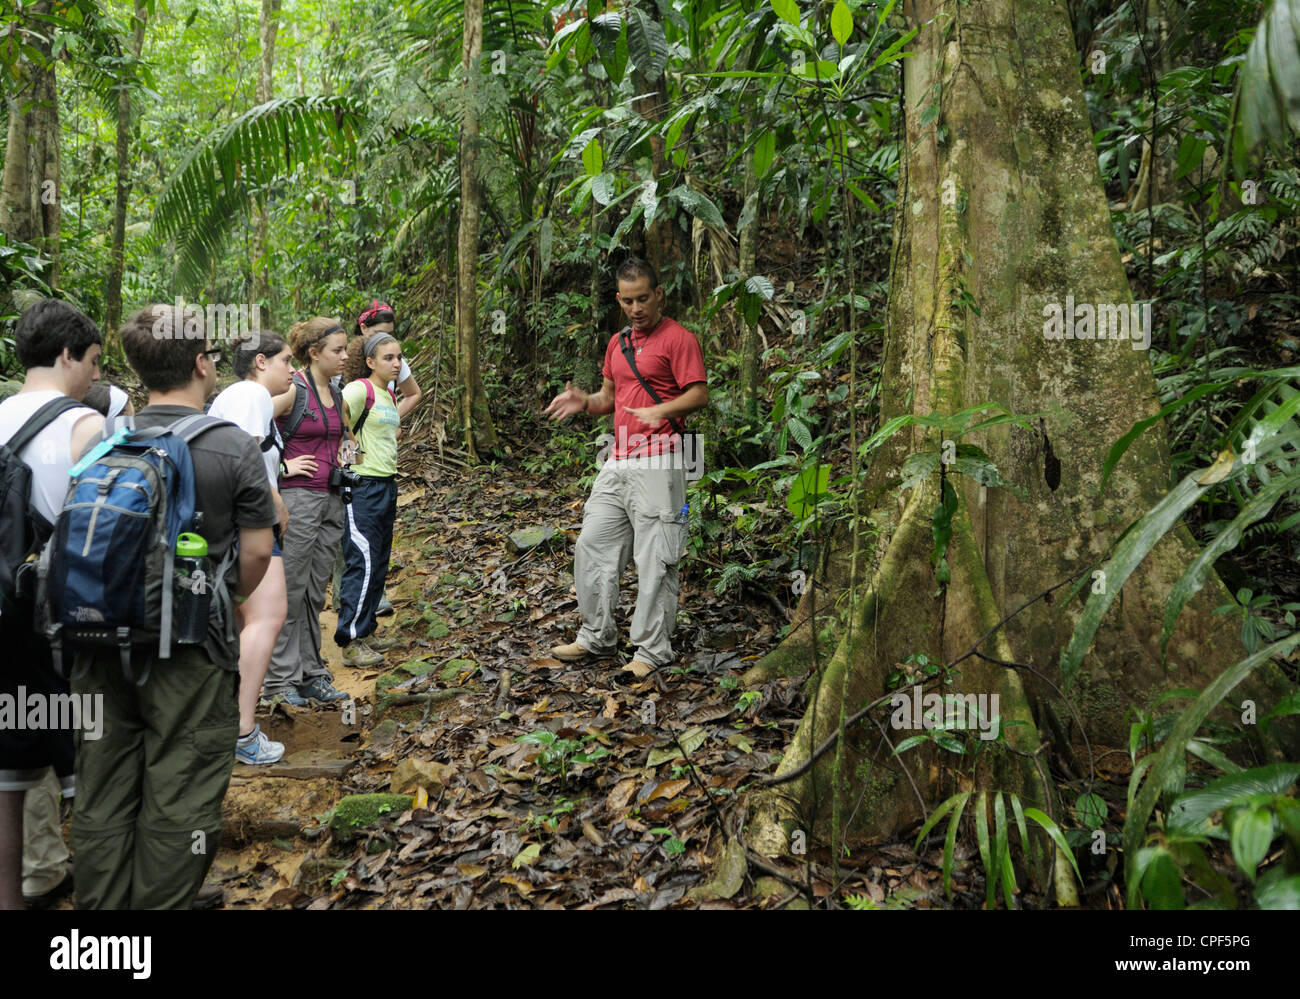 Group of teenage ecotourists on a rainforest ecology walk, Selva Verde, Costa Rica. Their guide is a Costa Rican naturalist Stock Photo